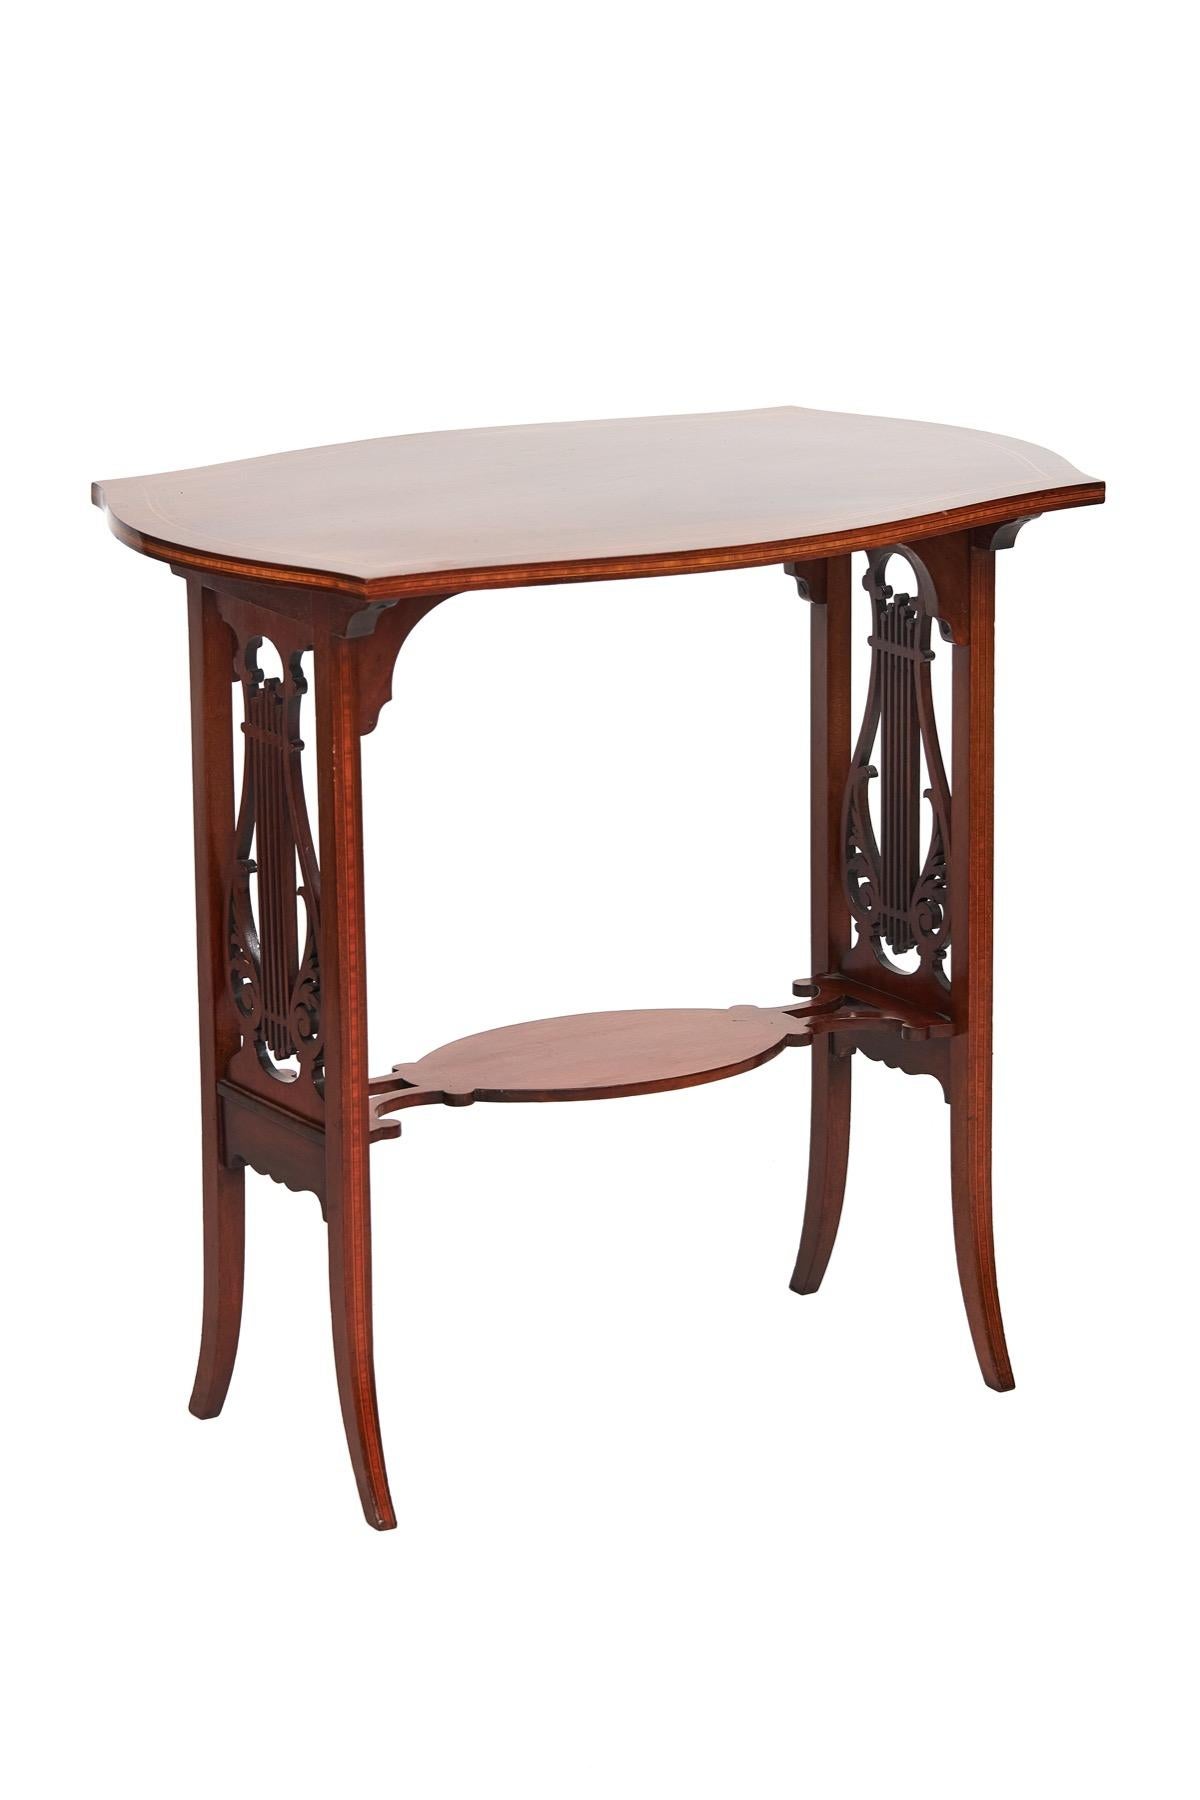 Fine Sheraton Revival Mahogany Inlaid & carved Lyre end support table
Circa 1900,
Shaped Rectangular top with Boxwood line inlay,
 Satinwood Banded inlay around edge,
Oval Shaped under tier with boxwood line inlay,
End supports with Lyre shaped open